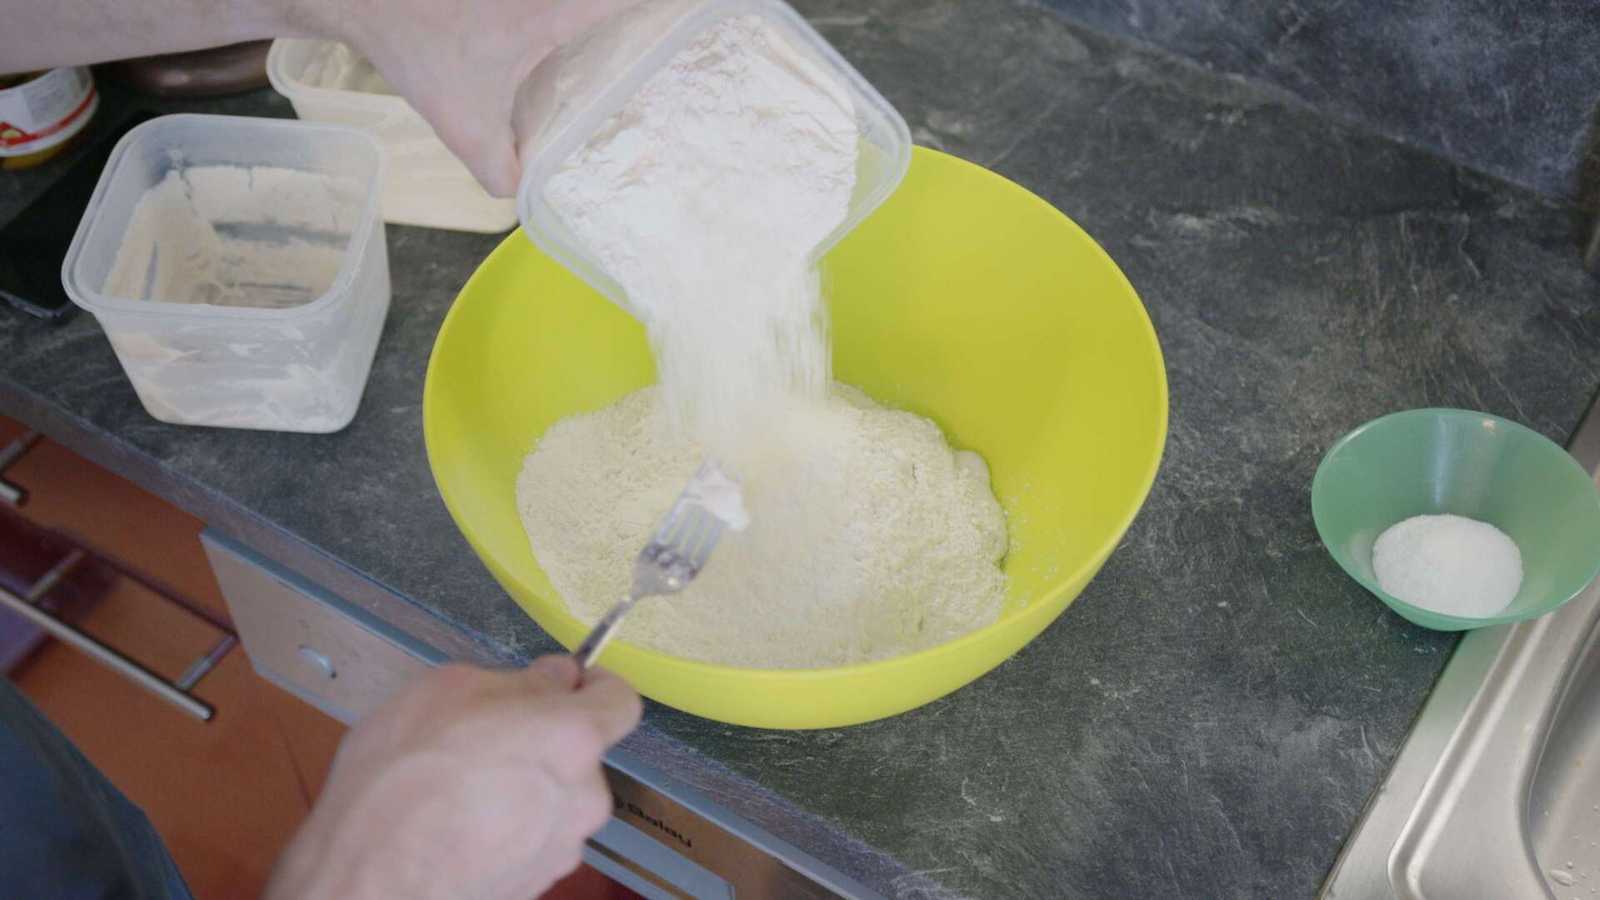 Flour getting added into a large bowl